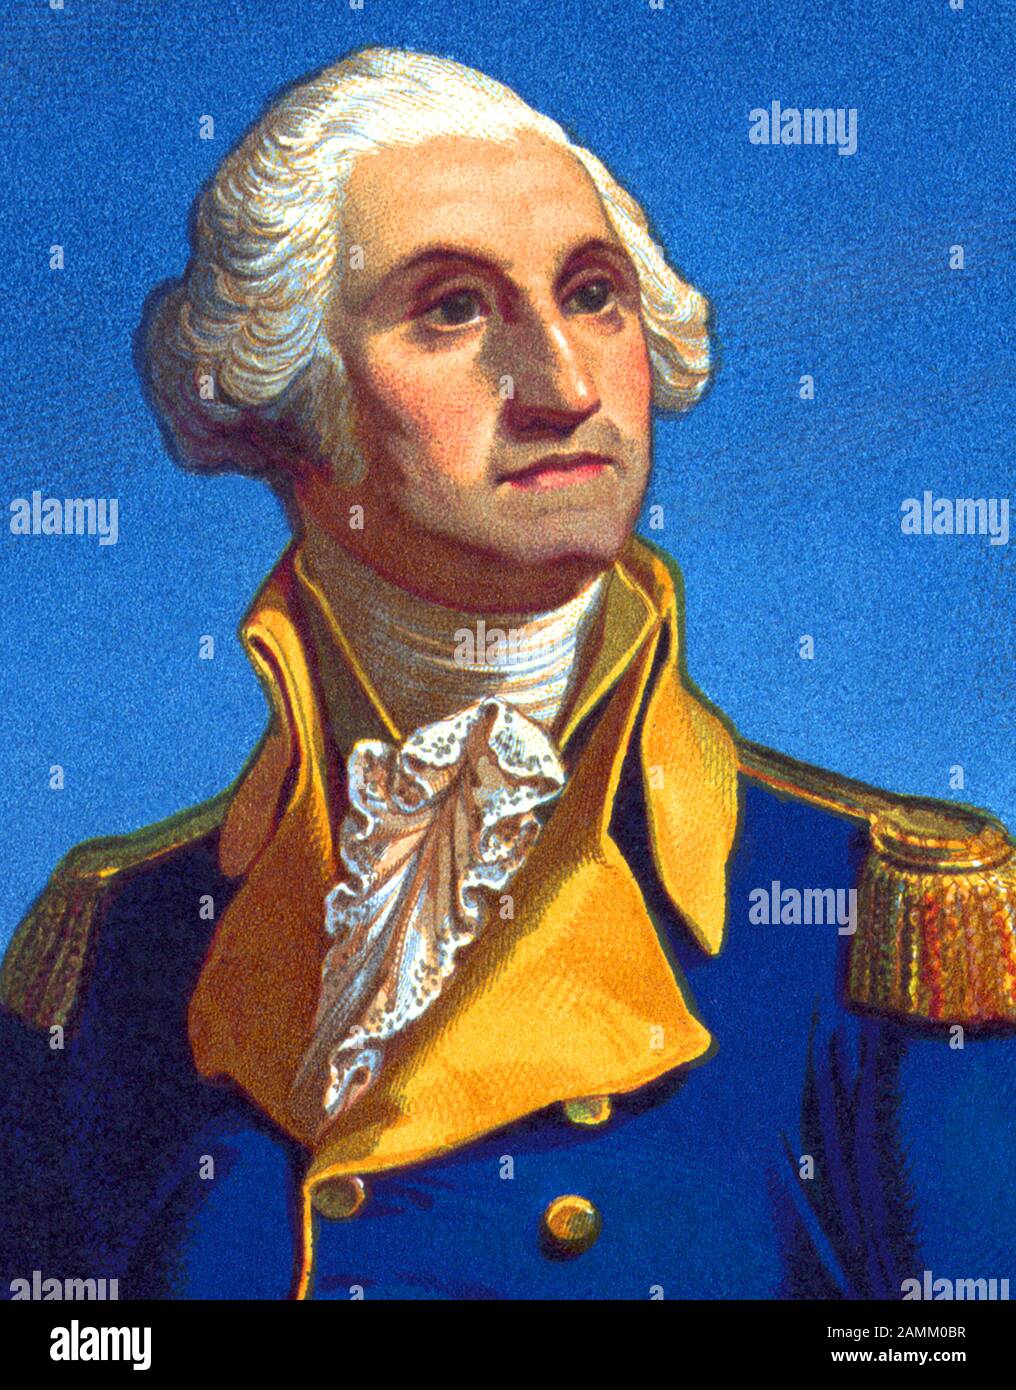 Vintage portrait of General George Washington (1732 - 1799) – Commander of the Continental Army in the American Revolutionary War / War of Independence (1775 – 1783) and the first US President (1789 - 1797). Detail from a print circa 1851 by P S Duval of Philadelphia from a drawing on stone by C Schuessele. Stock Photo